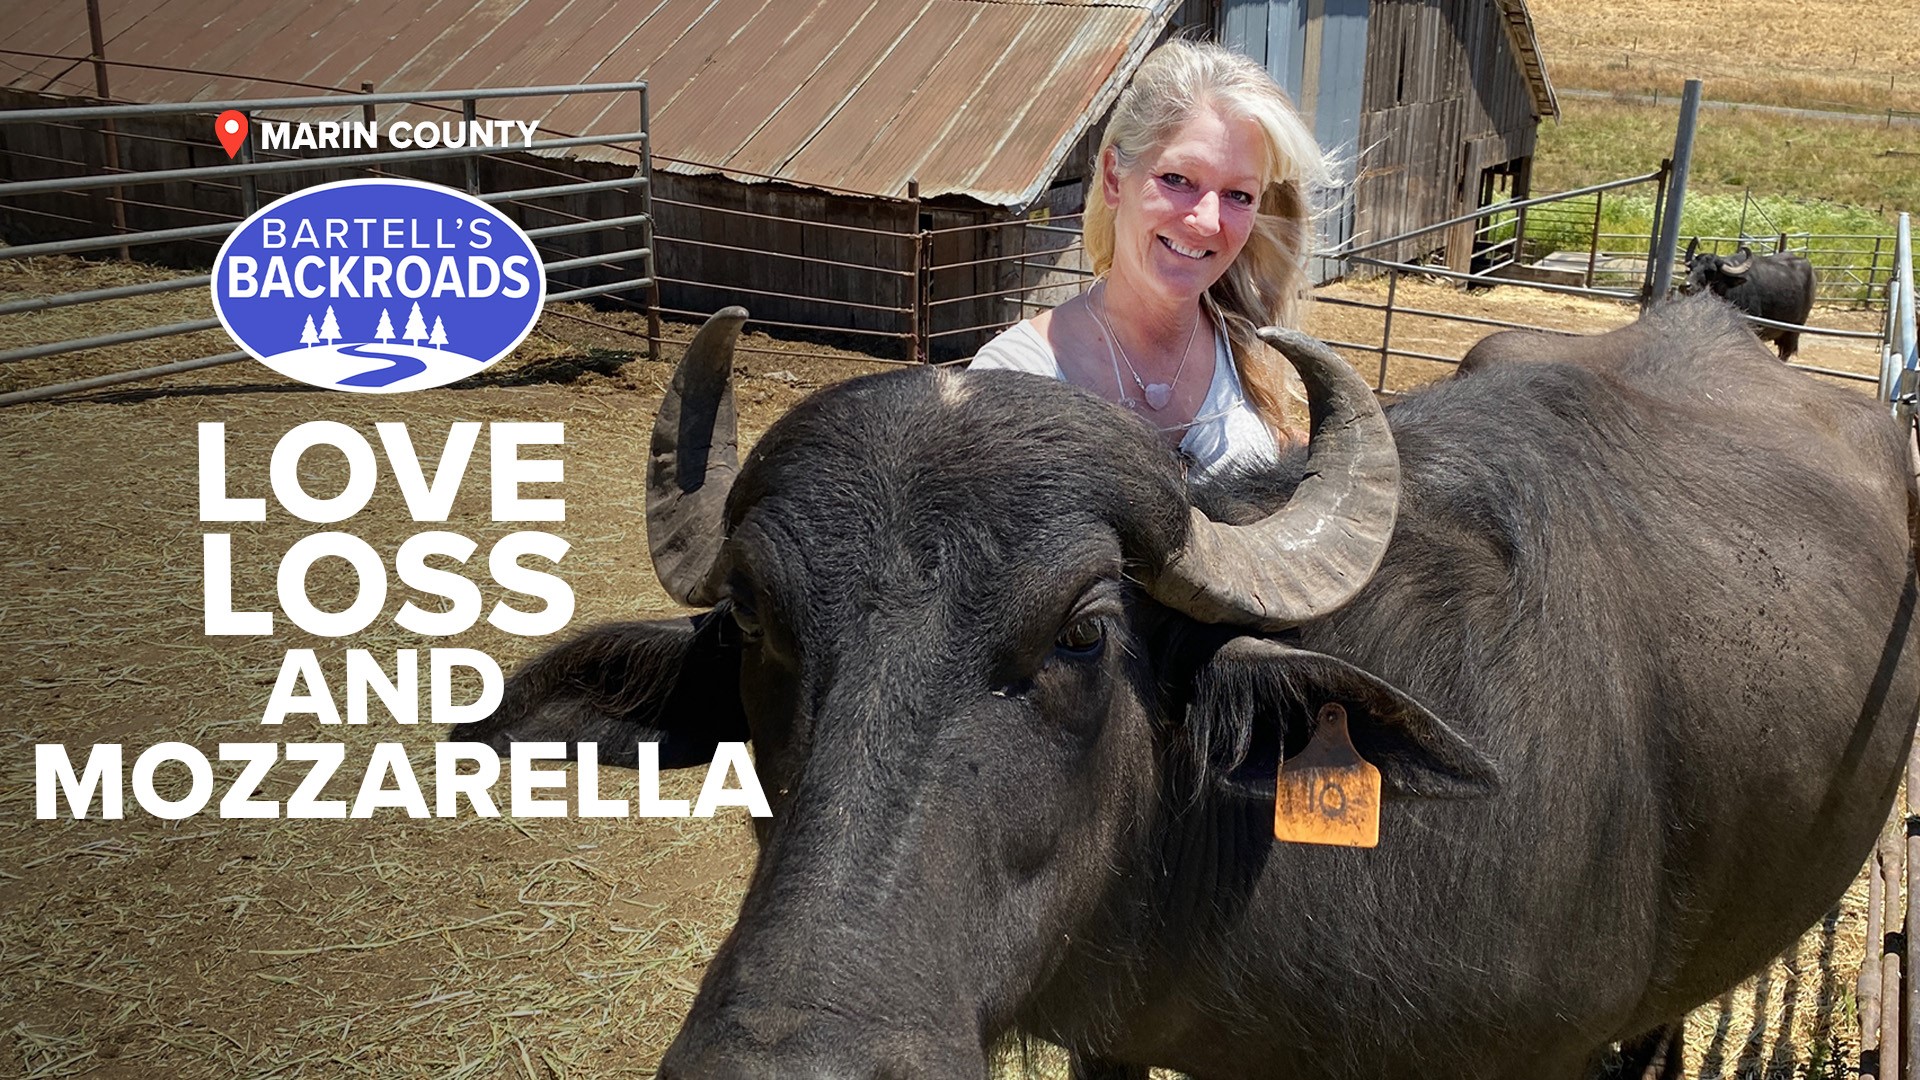 Audrey Hitchcock's four-legged friends helped her through a tragic loss. Now, she's struggling to find a new home for her water buffalo dairy.